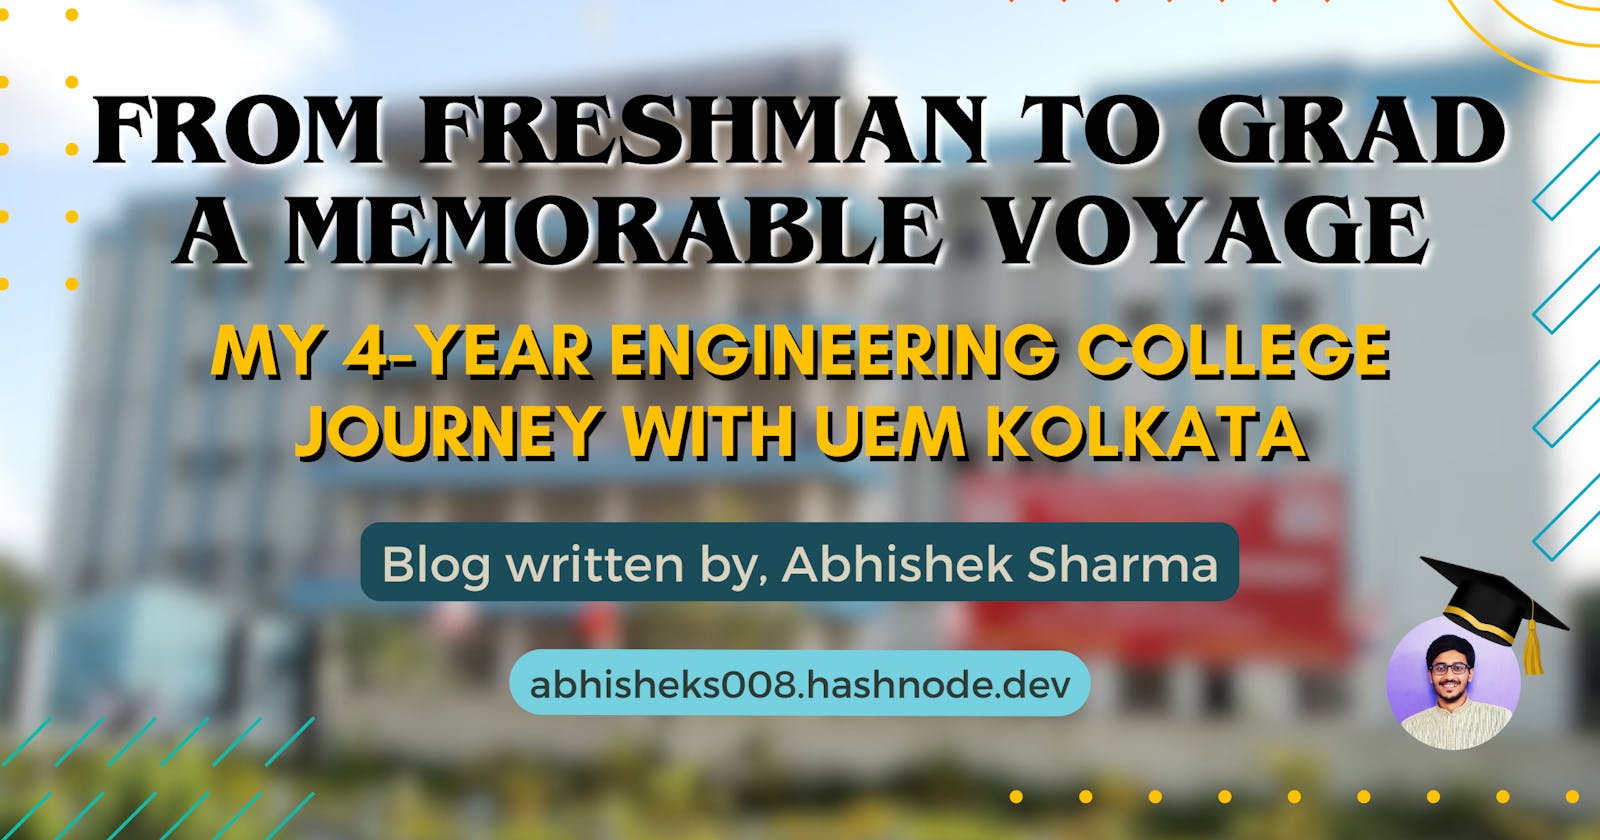 From Freshman to Grad: A Memorable Voyage - My 4-Year Engineering College Journey with UEM Kolkata